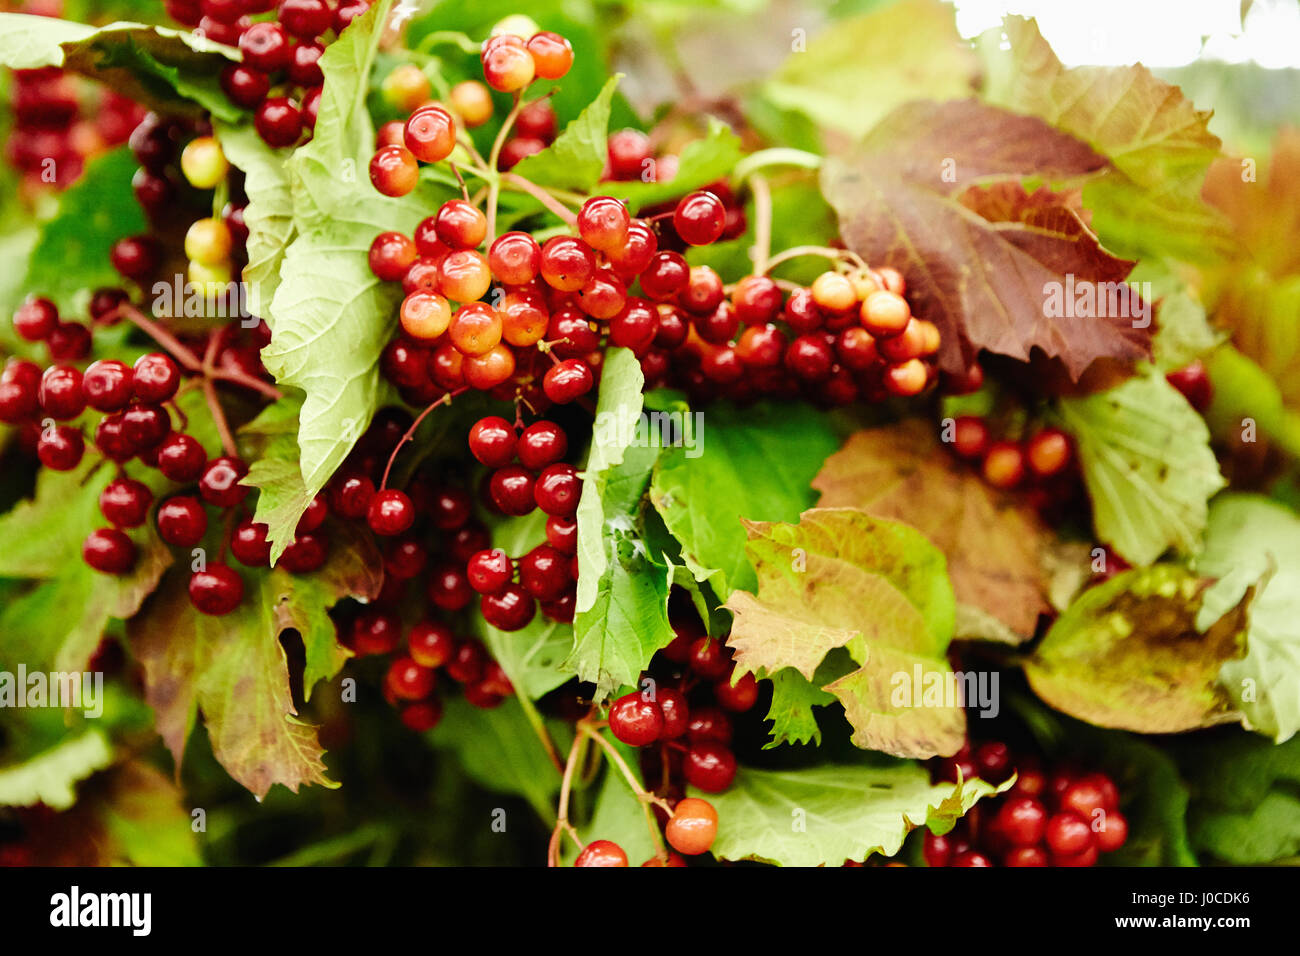 Cluster of red berries and leaves Stock Photo